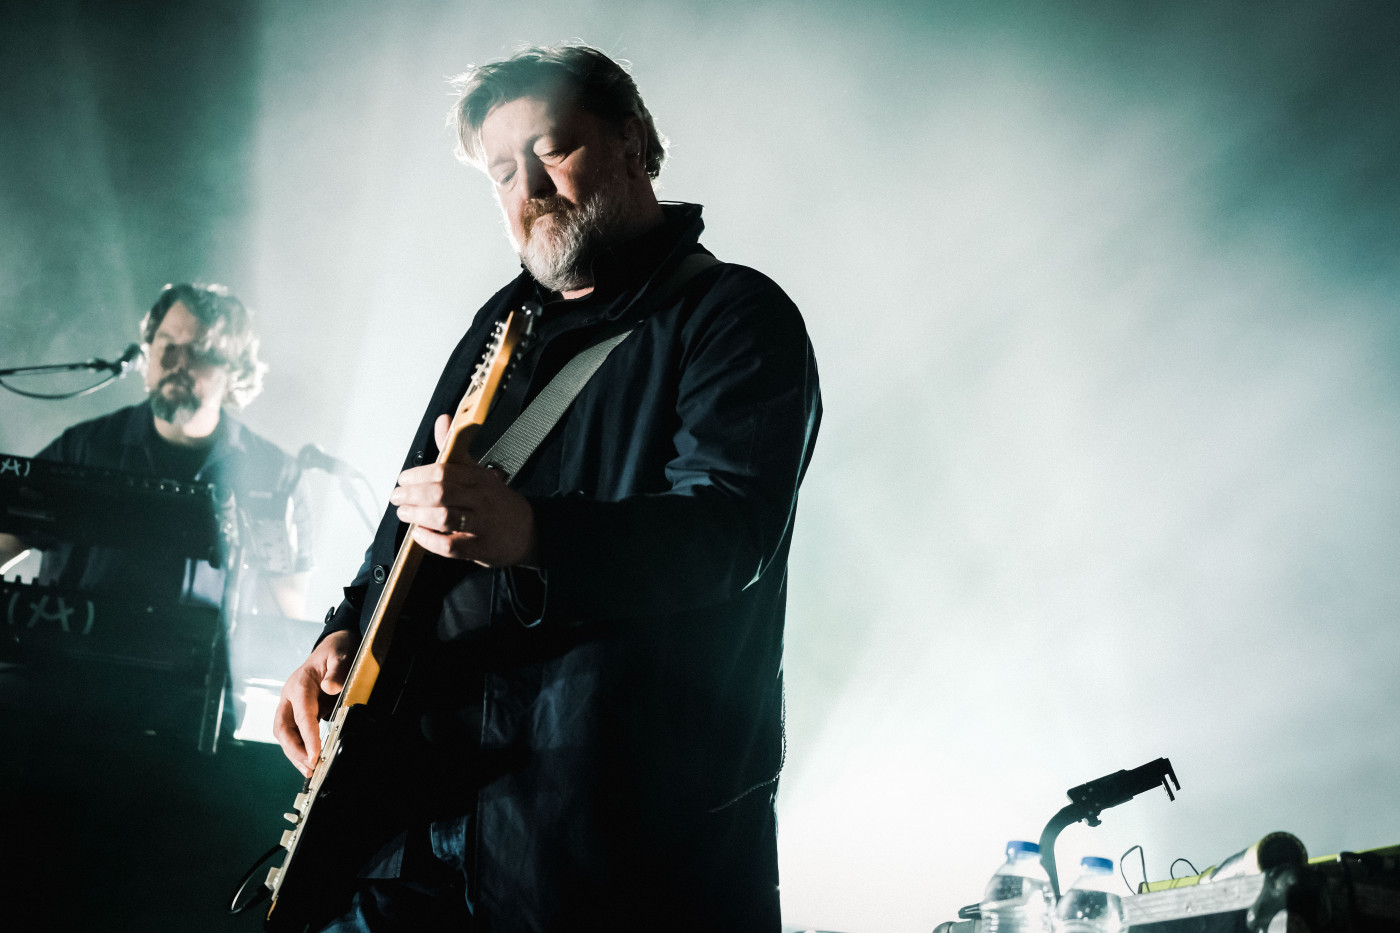 Elbow perform onstage at Usher Hall in Edinburgh on 8th September 2021